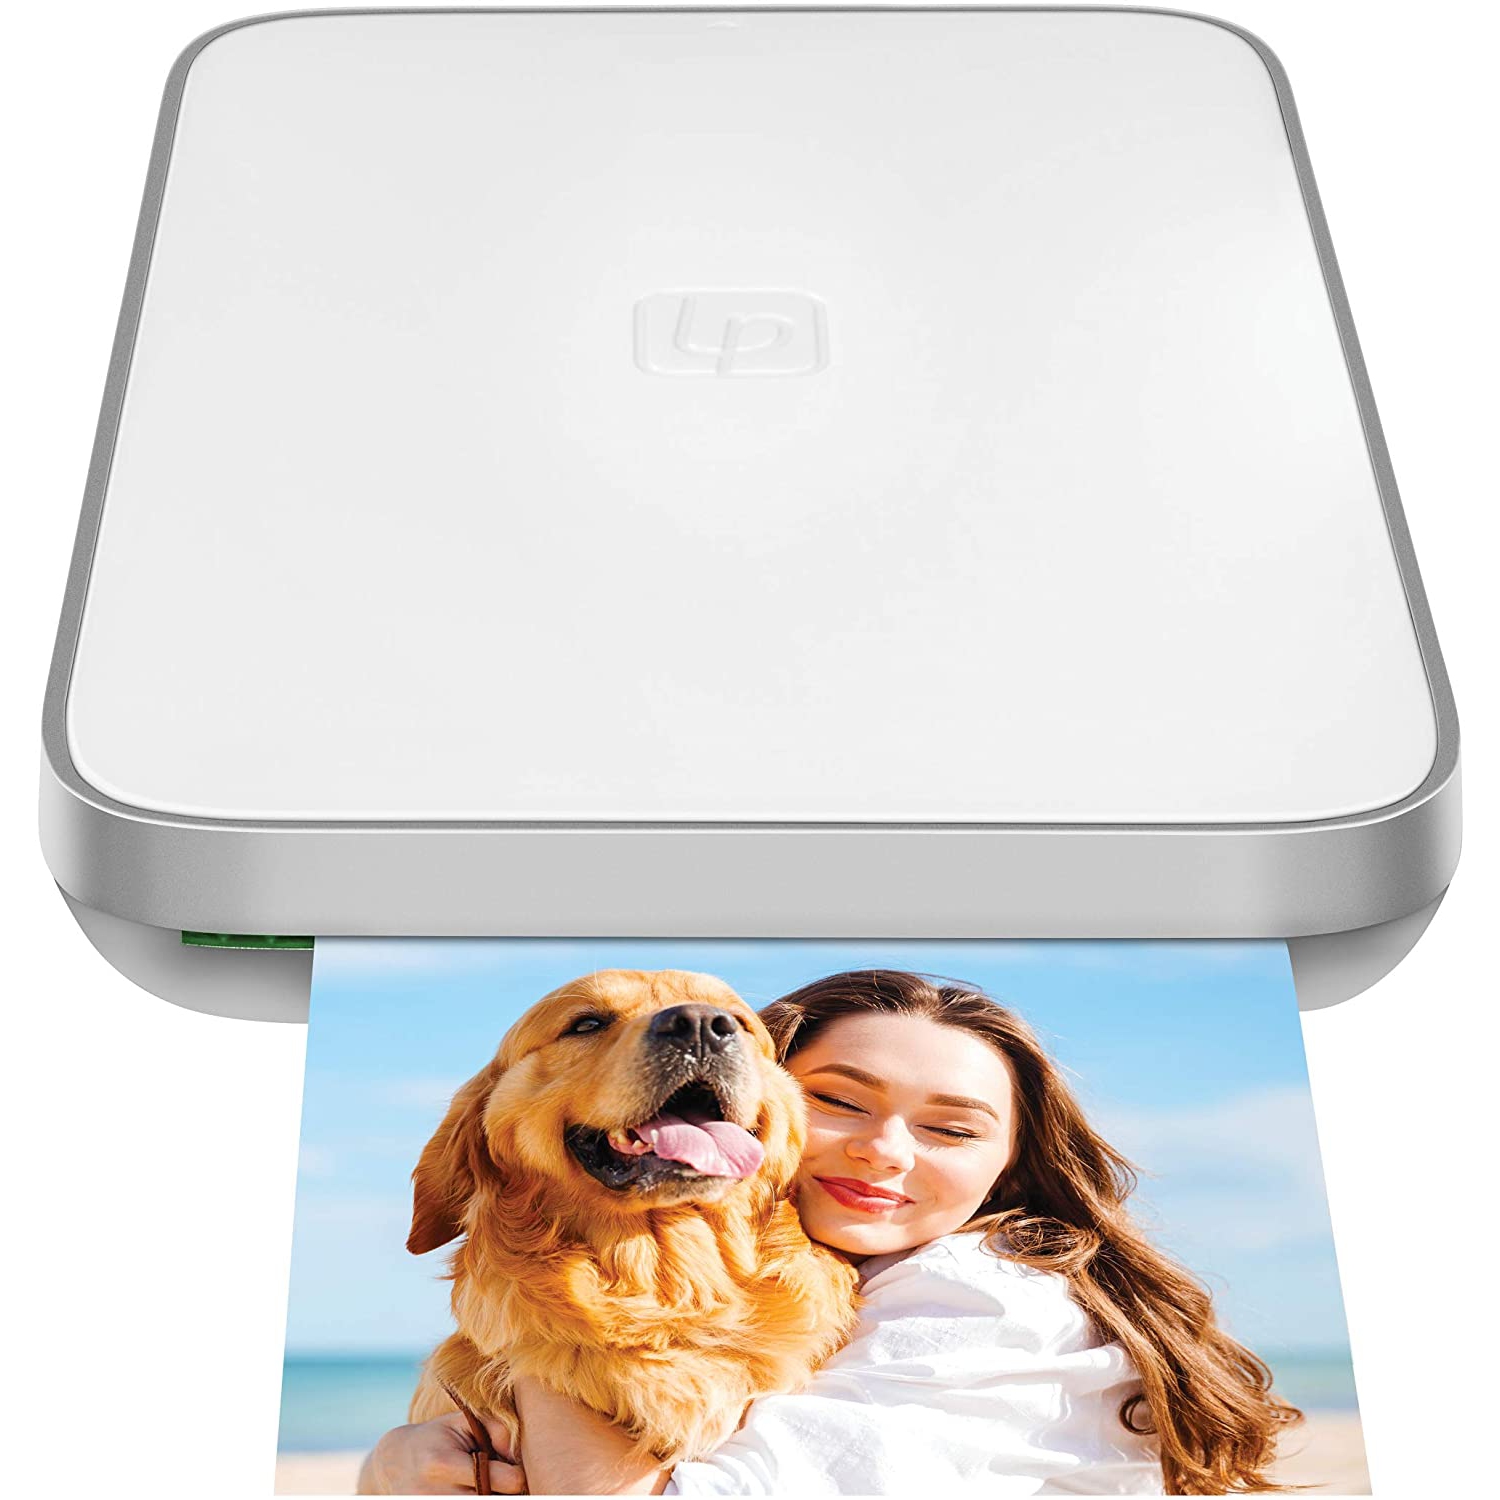 Lifeprint 3x4.5 Portable Photo AND Video Printer for iPhone and